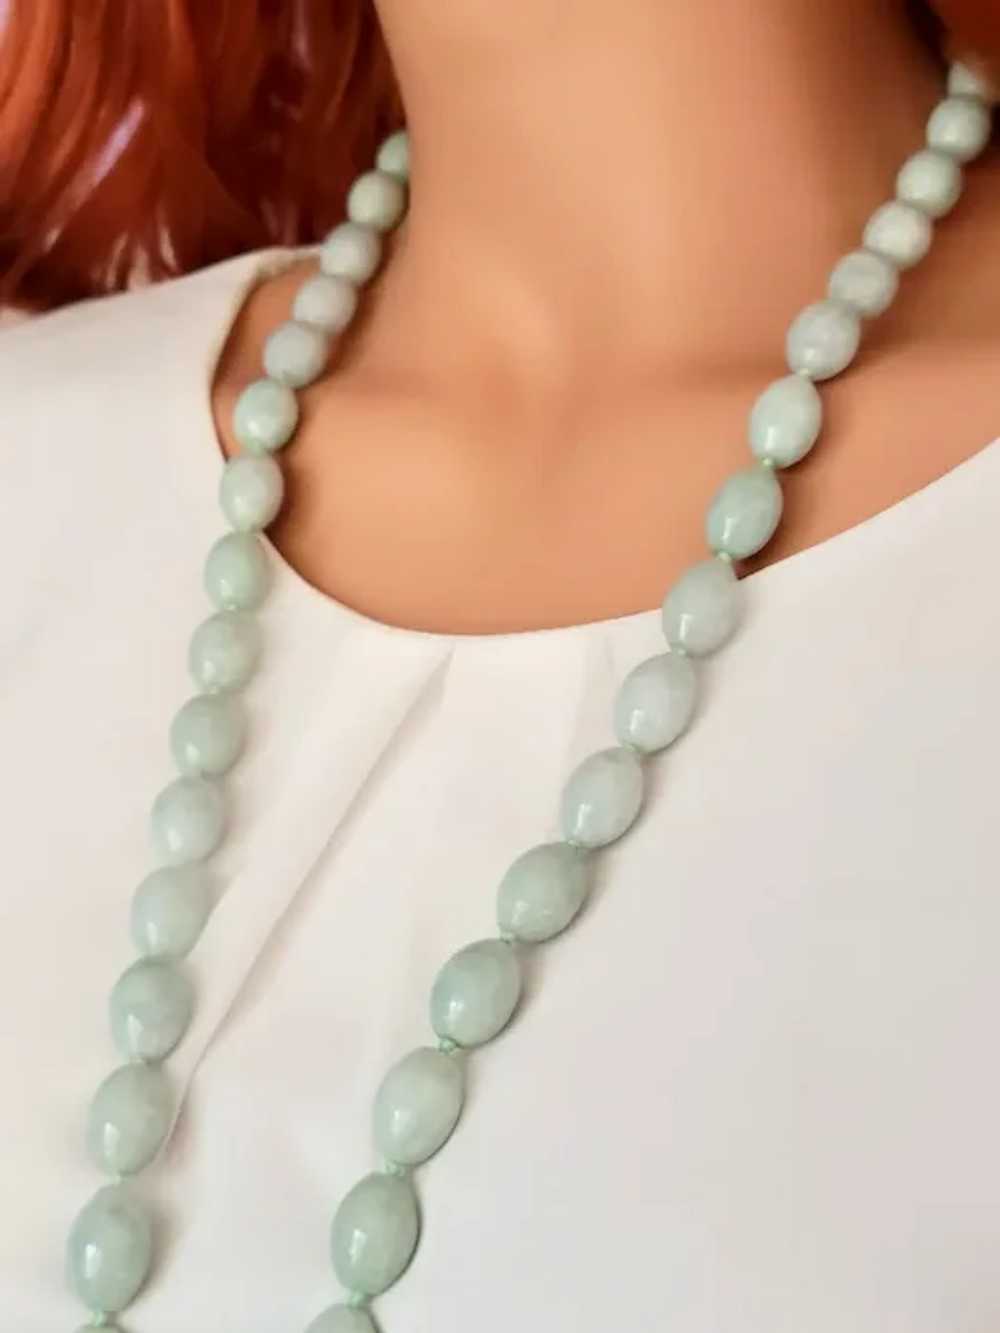 Vintage Chinese Jade Long Necklace - image 6